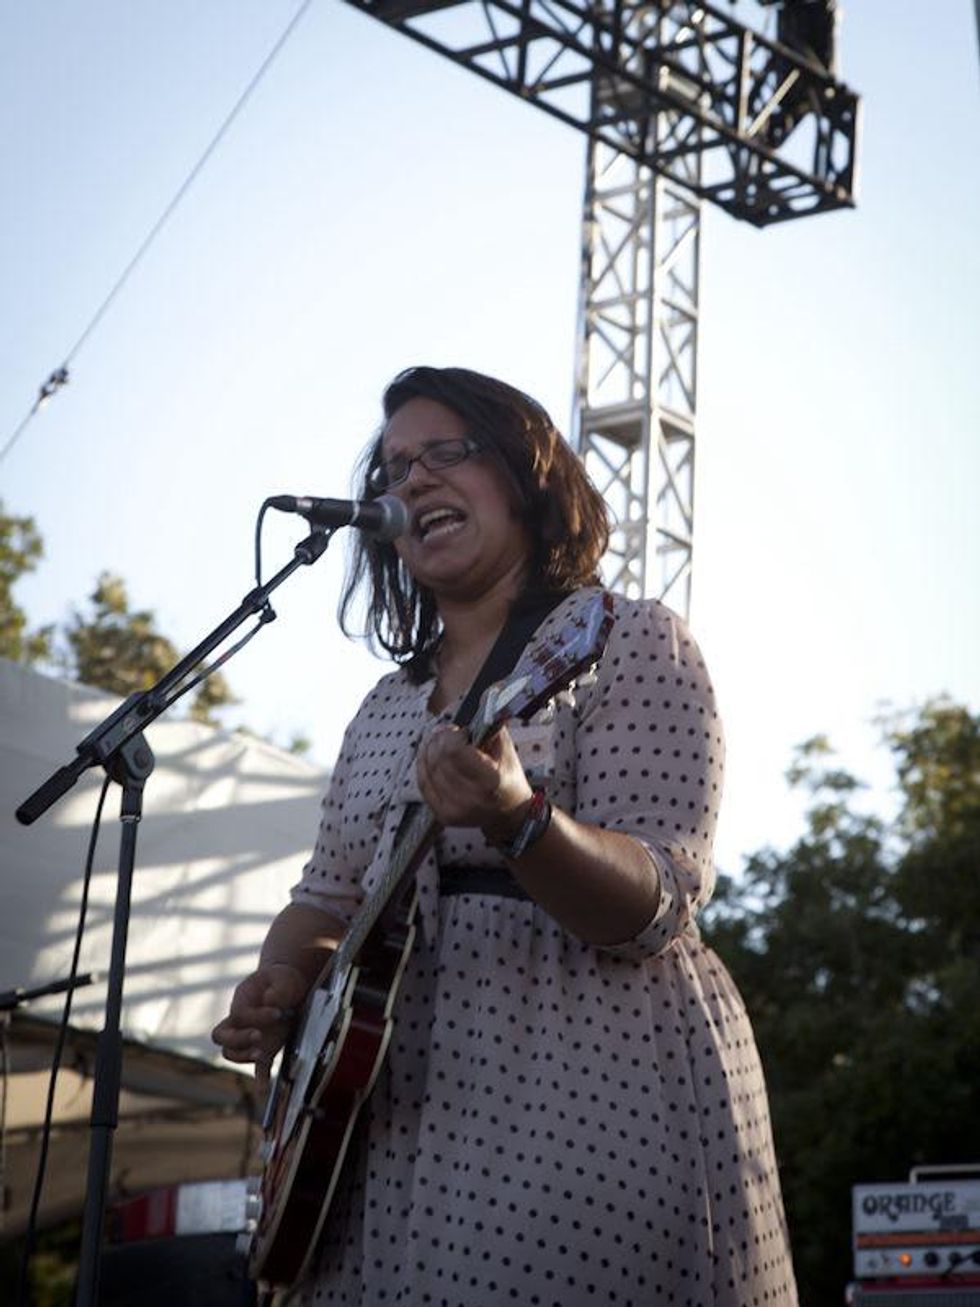 Austin Photo Set: News_pages_acl day 1_oct 2012_alabamashakes2